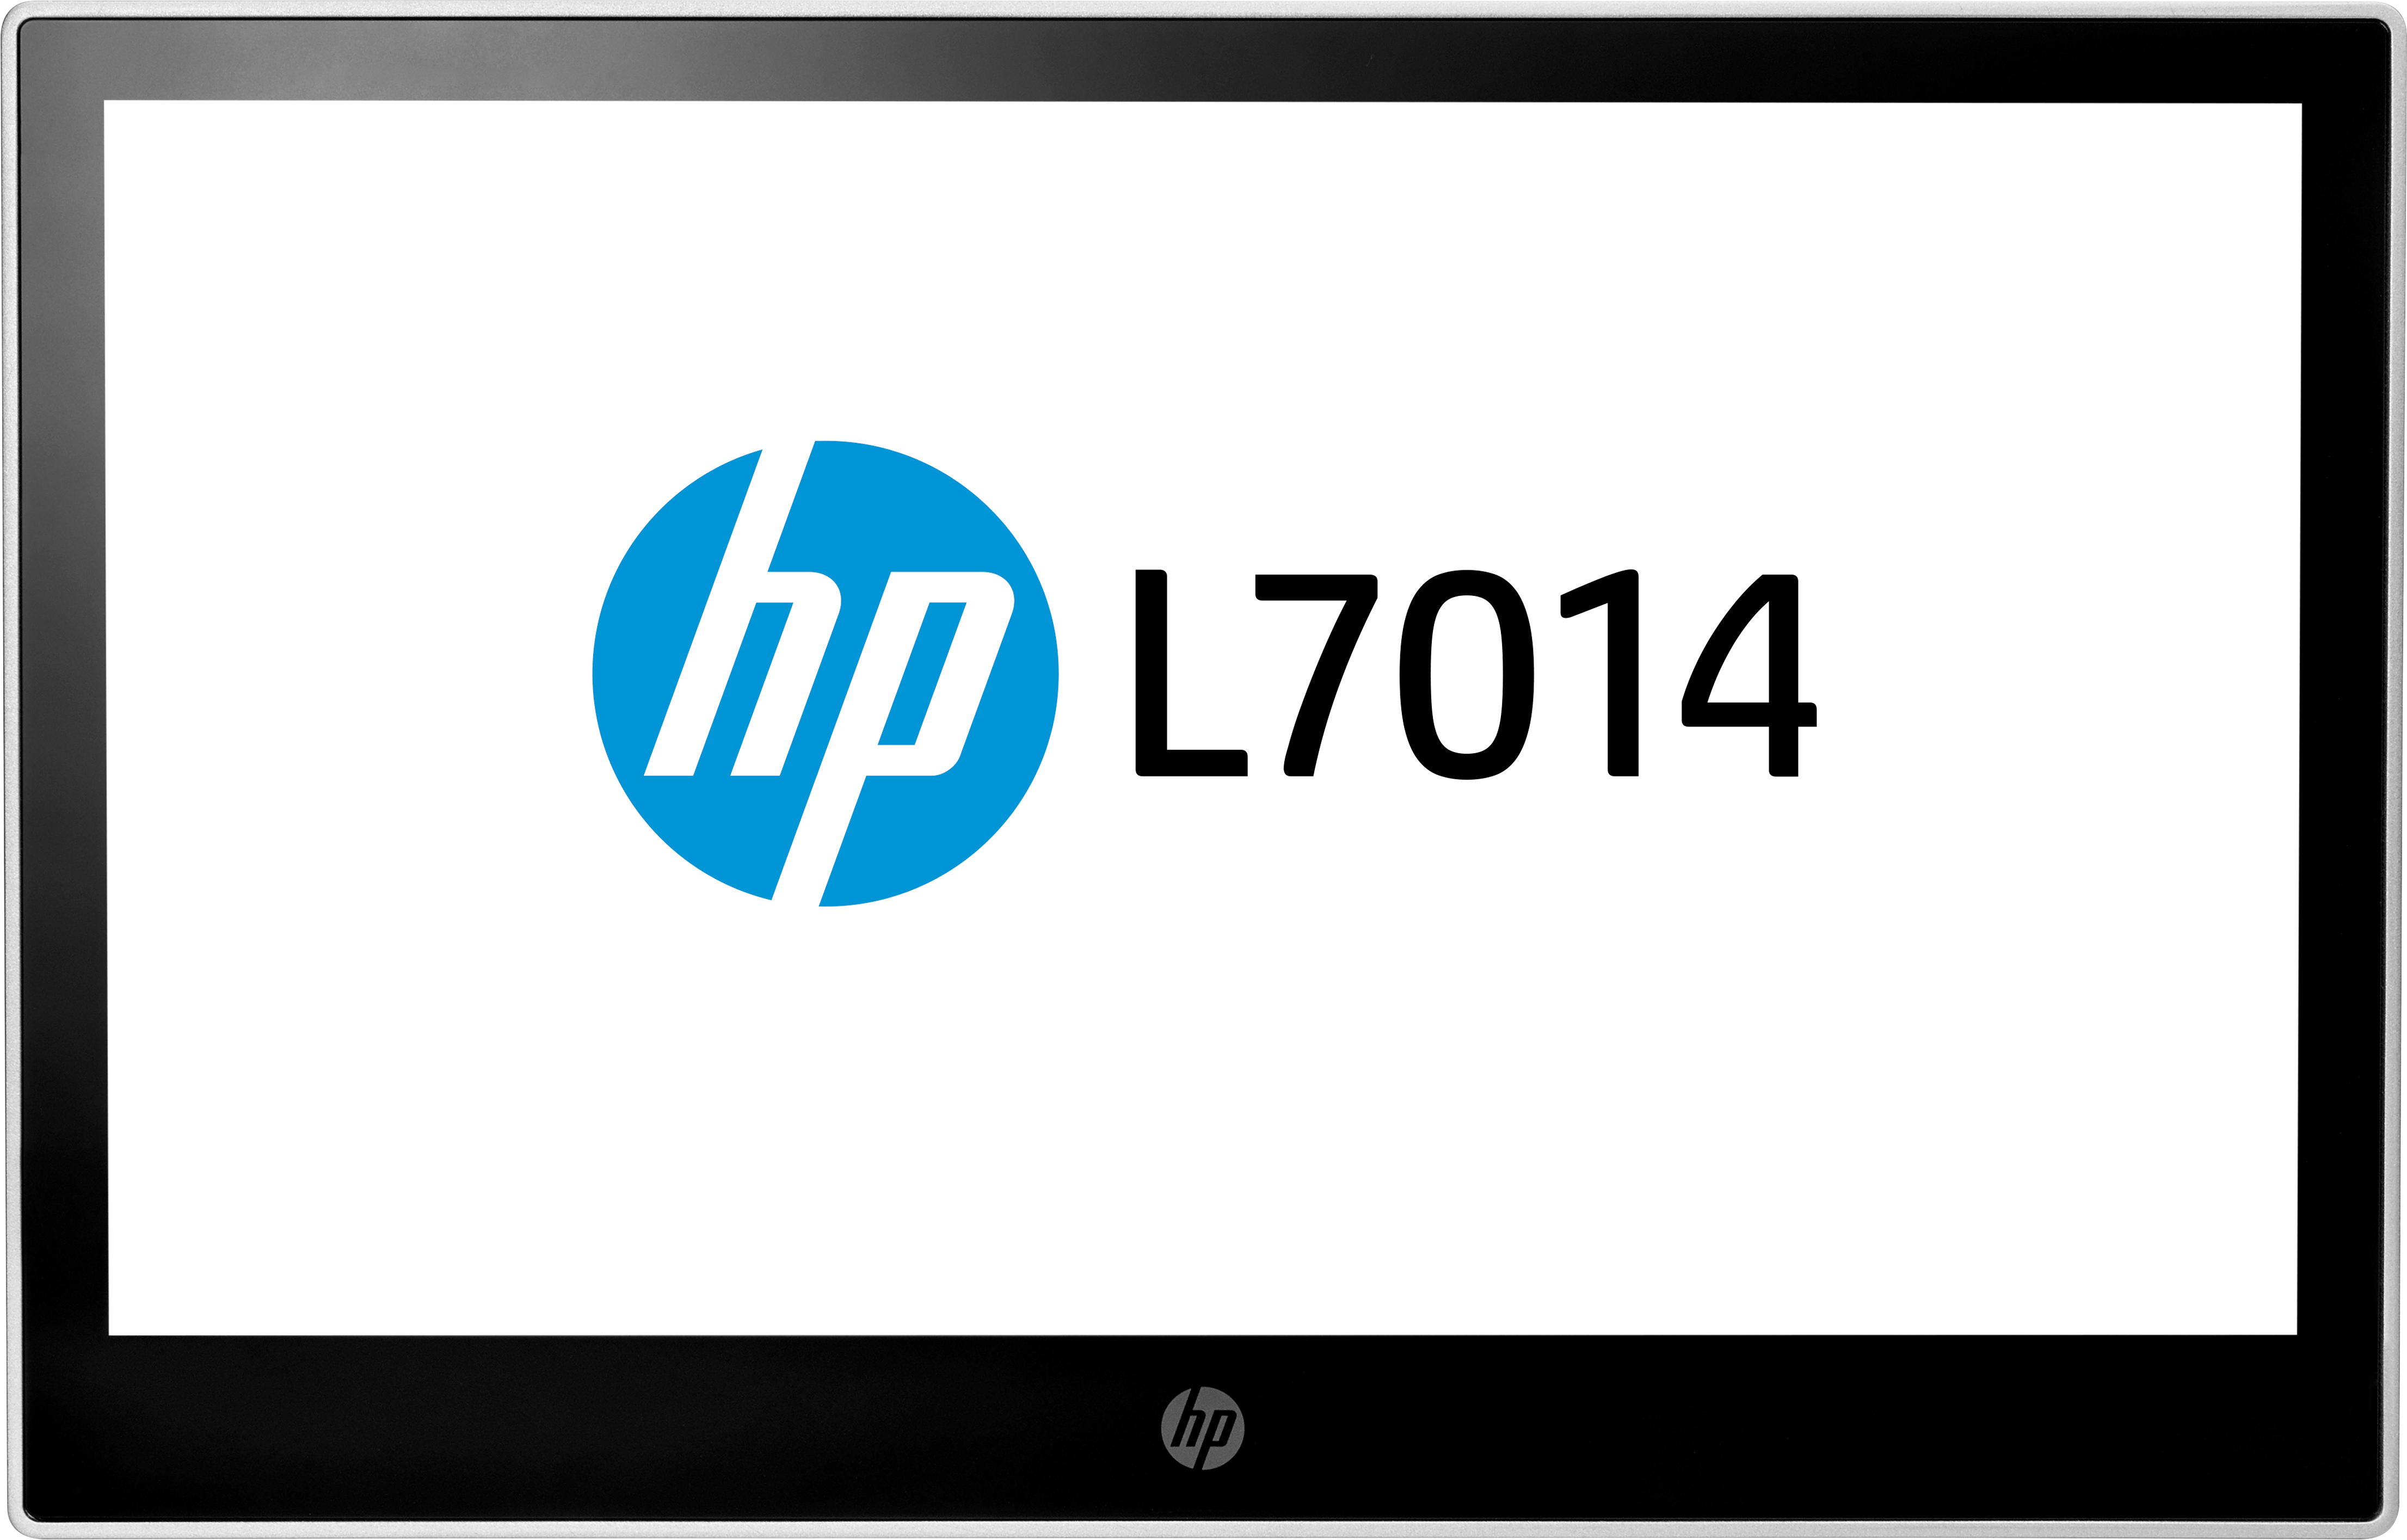 HP L7014 Retail Monitor - Head Only - LED-Monitor - 35.6 cm (14")